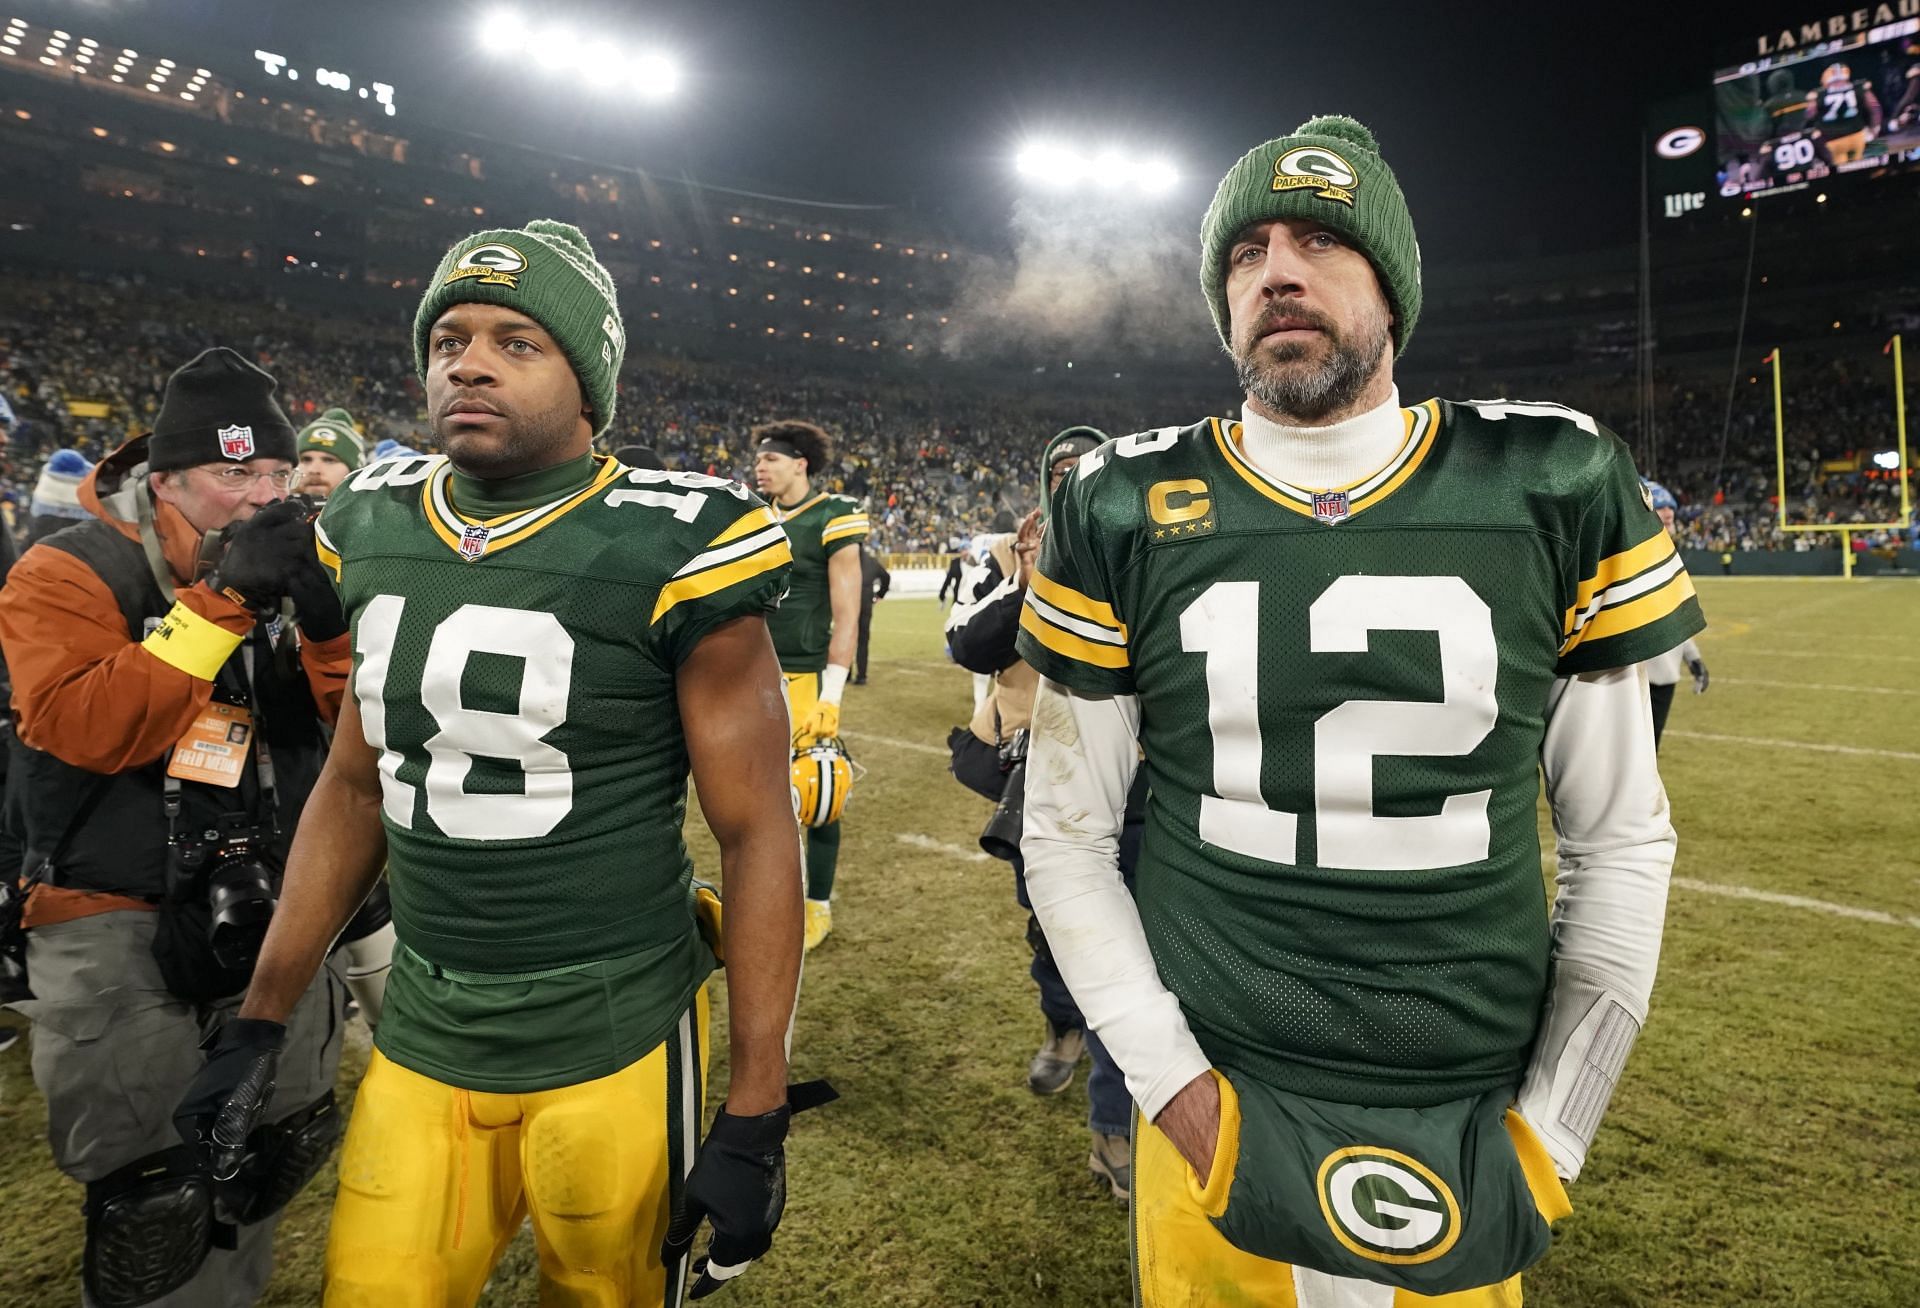 Where is Aaron Rodgers going now?